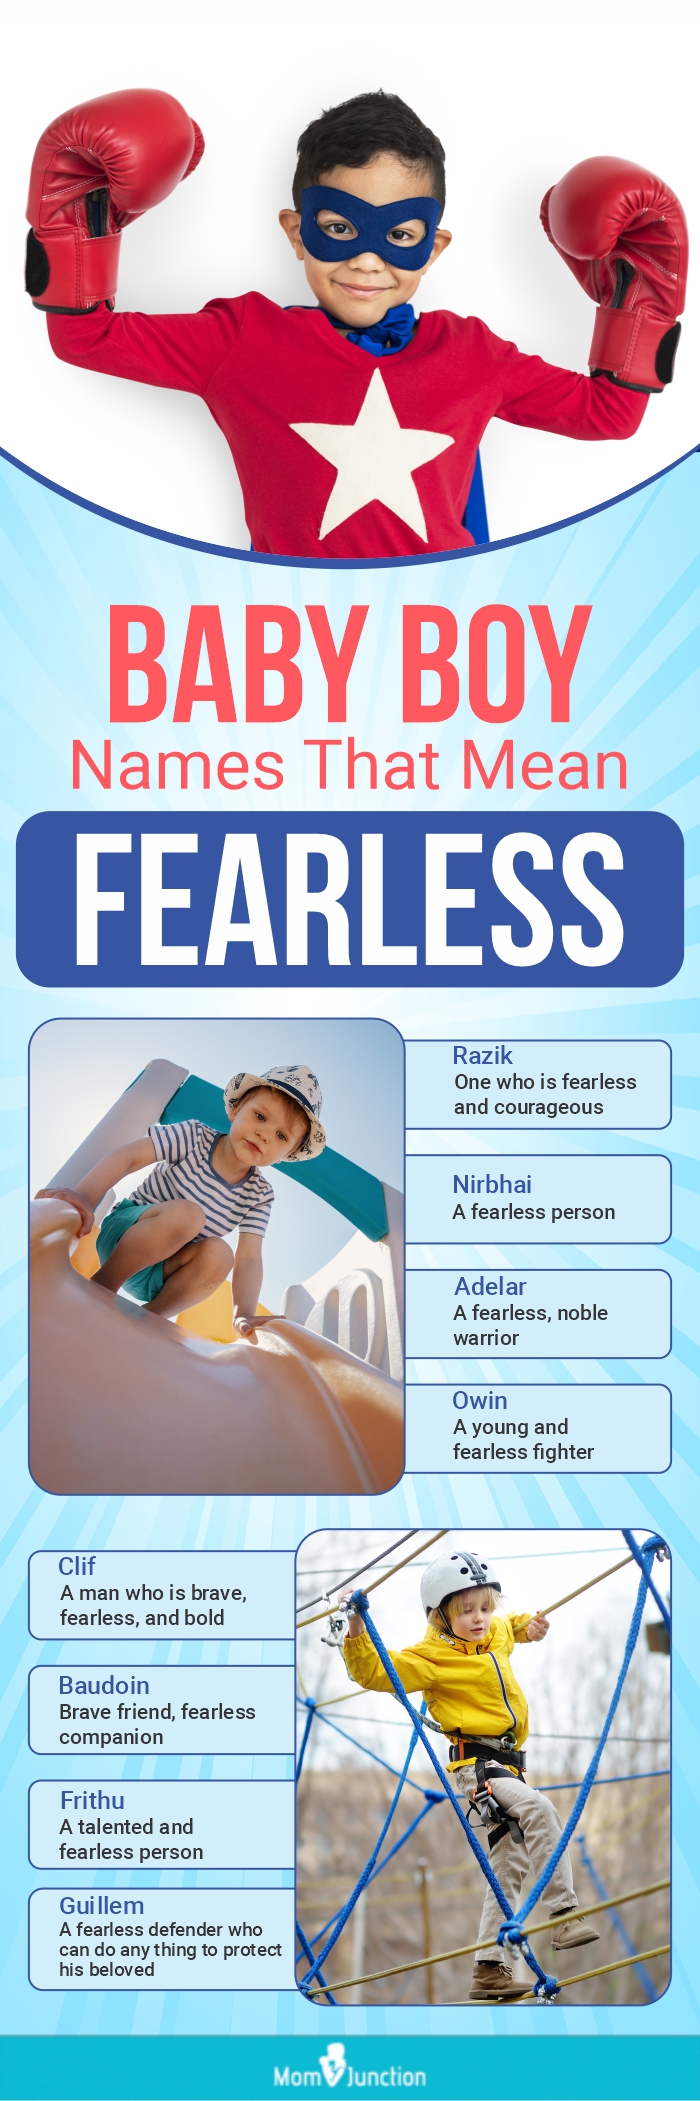 baby boy names that mean fearless (infographic)